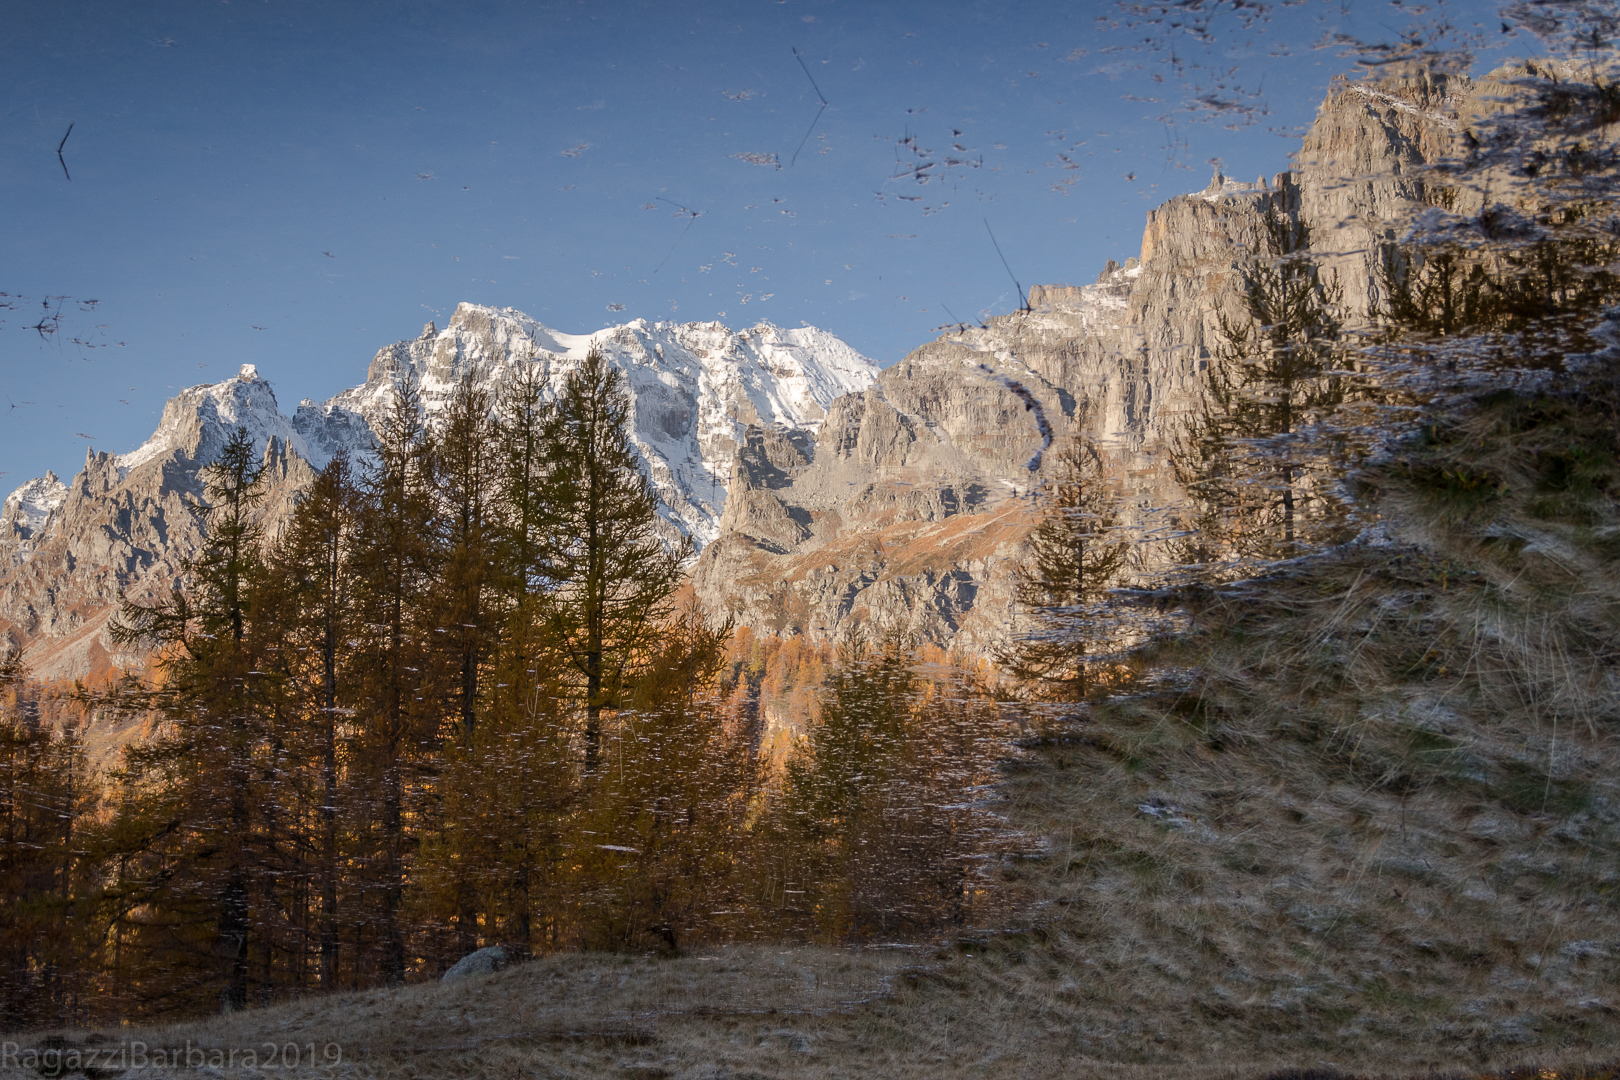 The mountains reflected in the Devero...